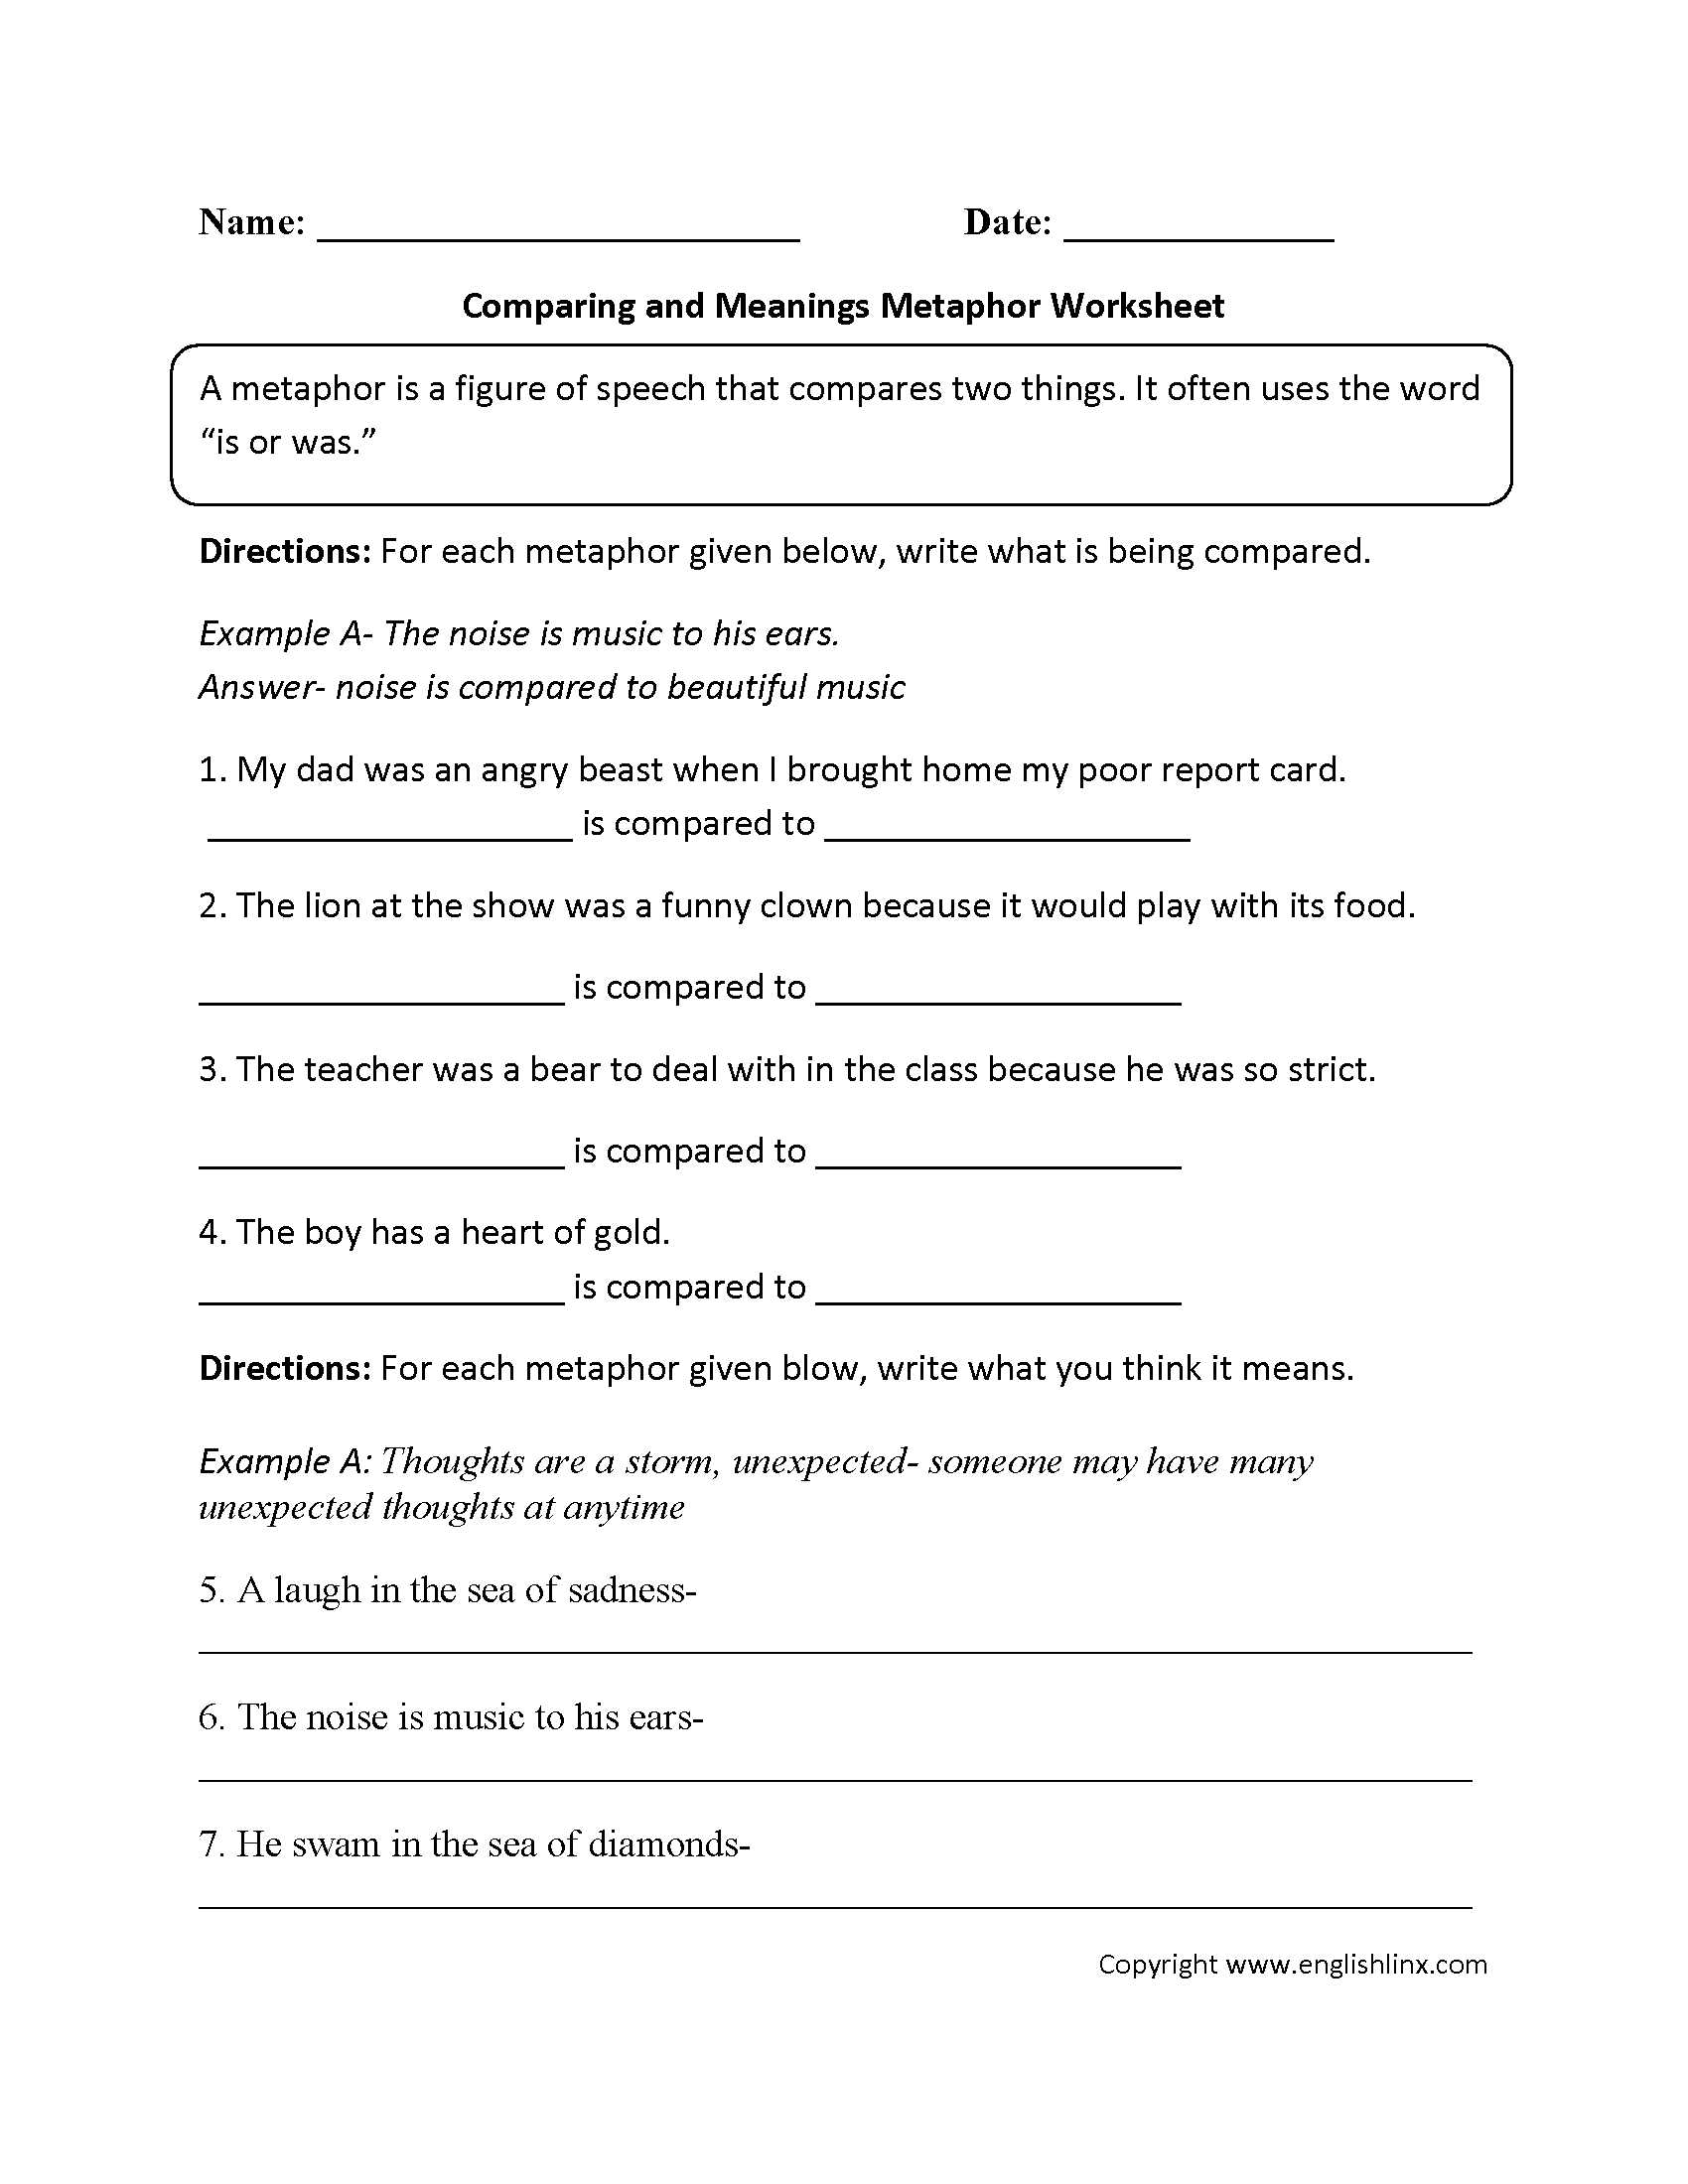 Act English Practice Worksheets Pdf Also Free Printable Simile and Metaphor Worksheets Worksheets for All